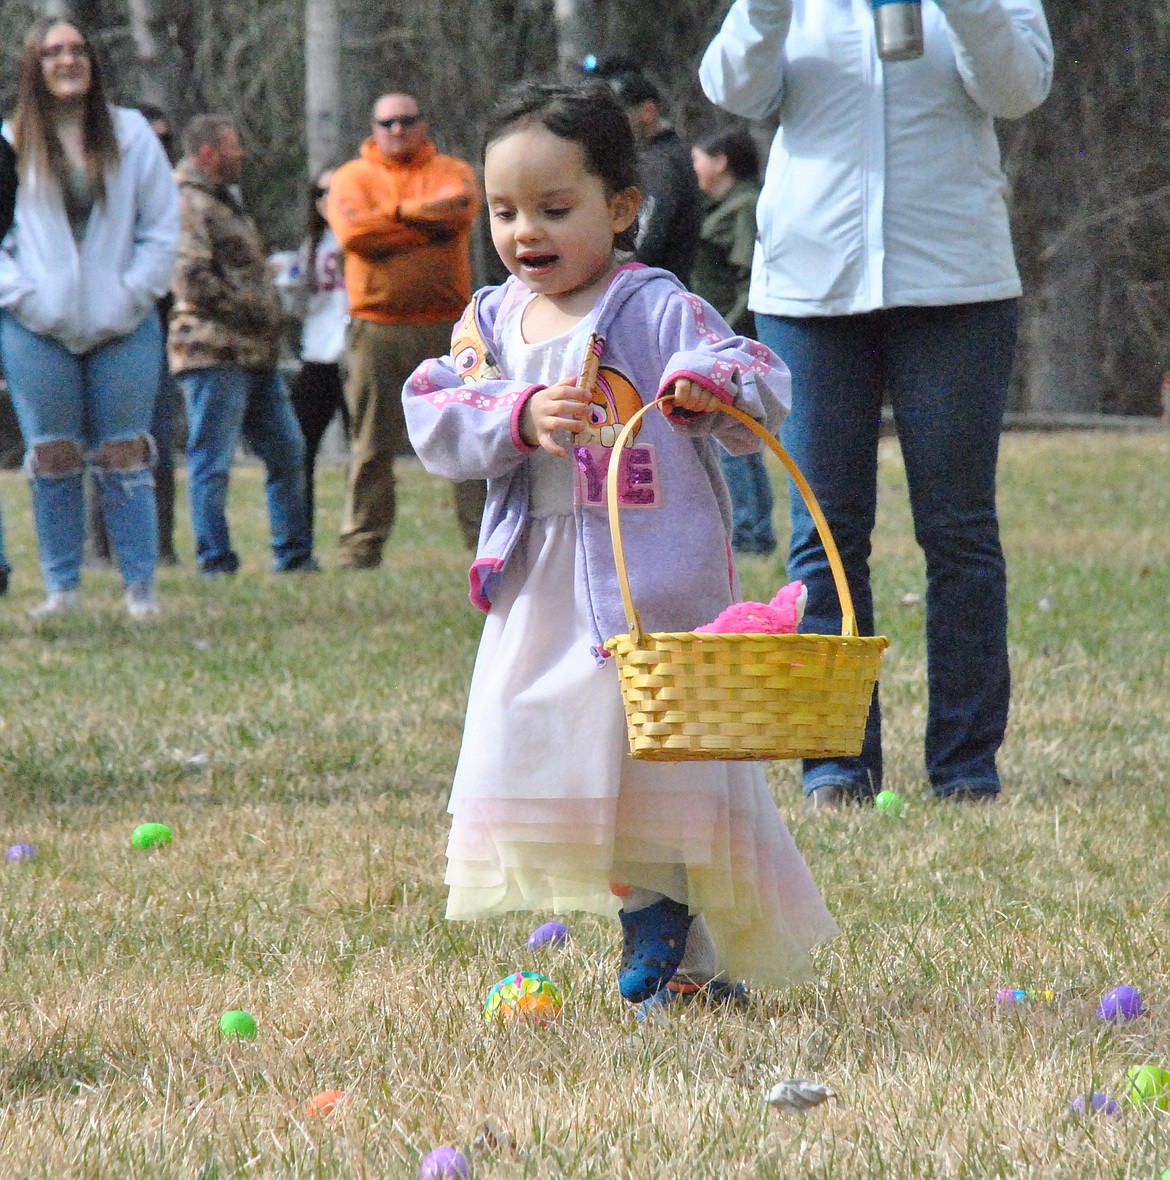 A little girl in an Easter dress and Crocs navigates a sea of plastic eggs in the youngest age group at the Saturday egg hunts in St. Regis. (Mineral Independent/Amy Quinlivan)